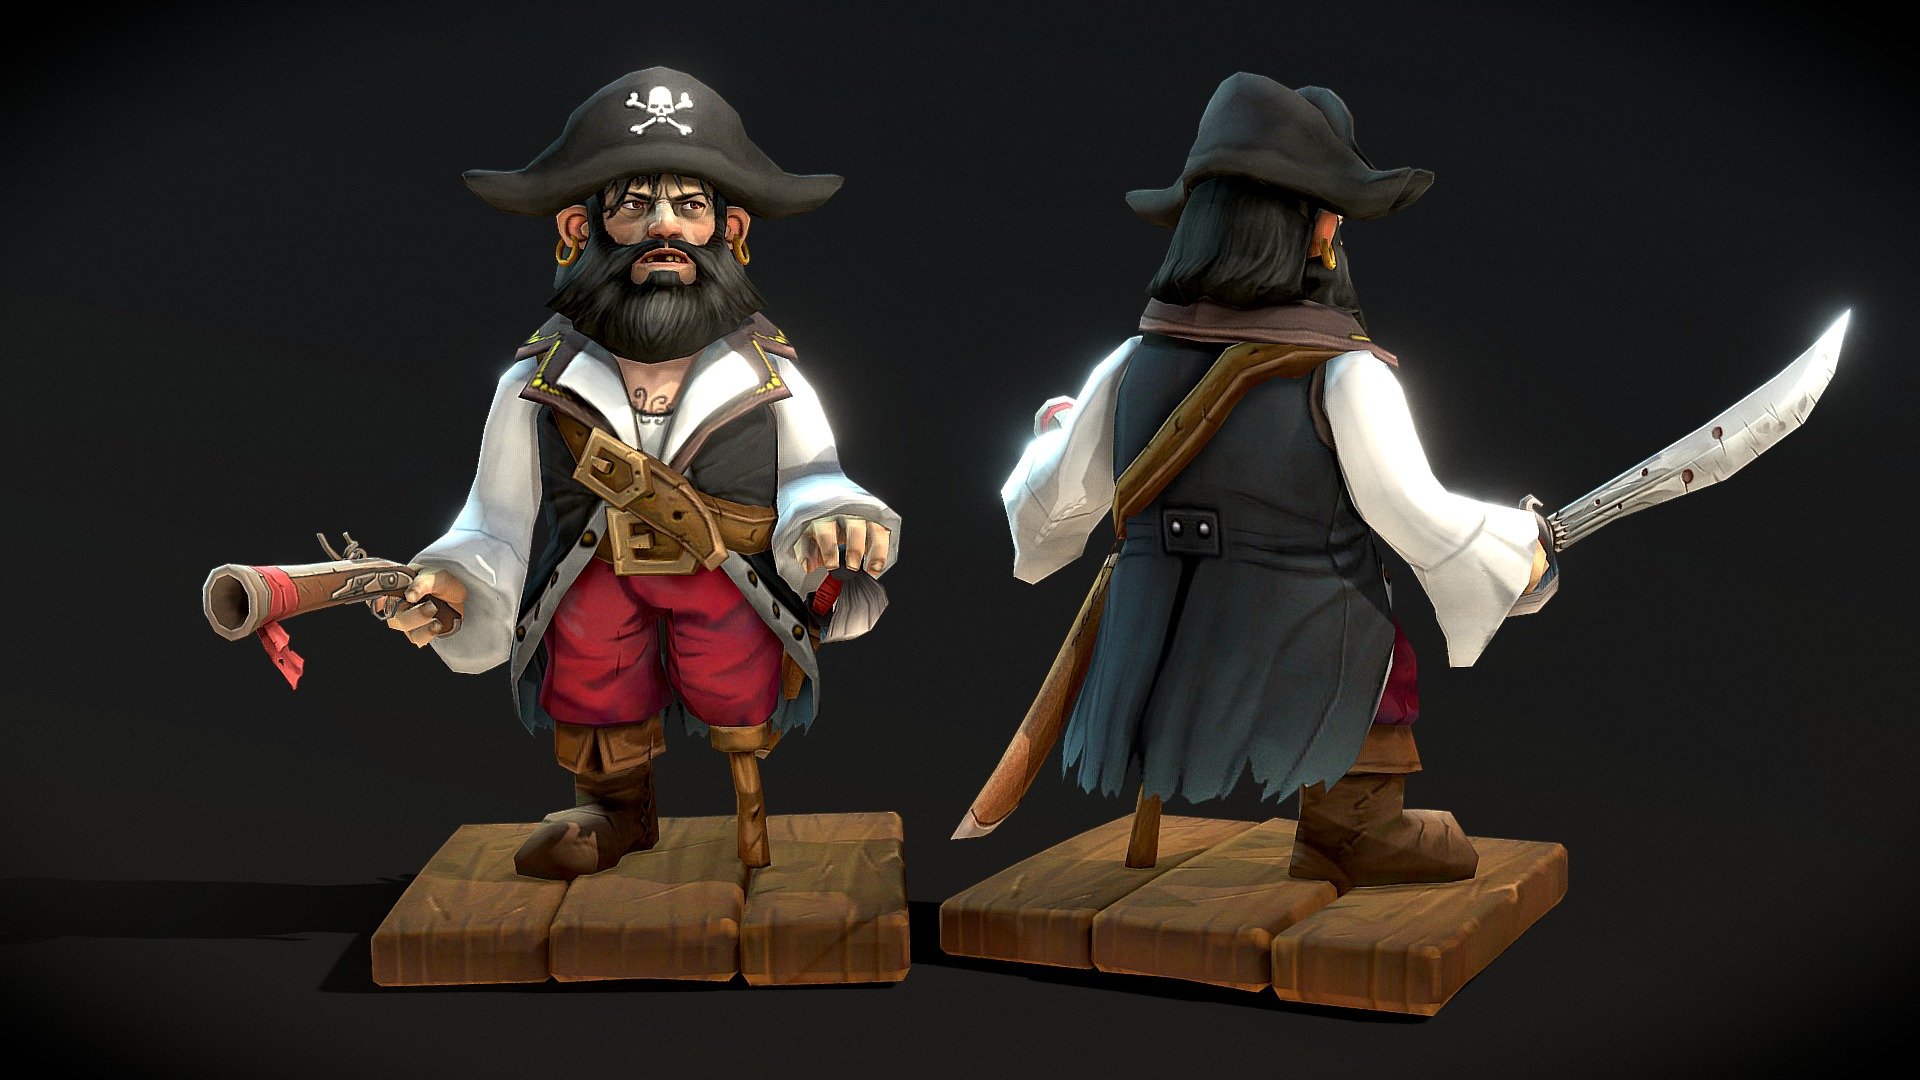 Pirate made for a blenderartist.org and sketchfab contest 3d model